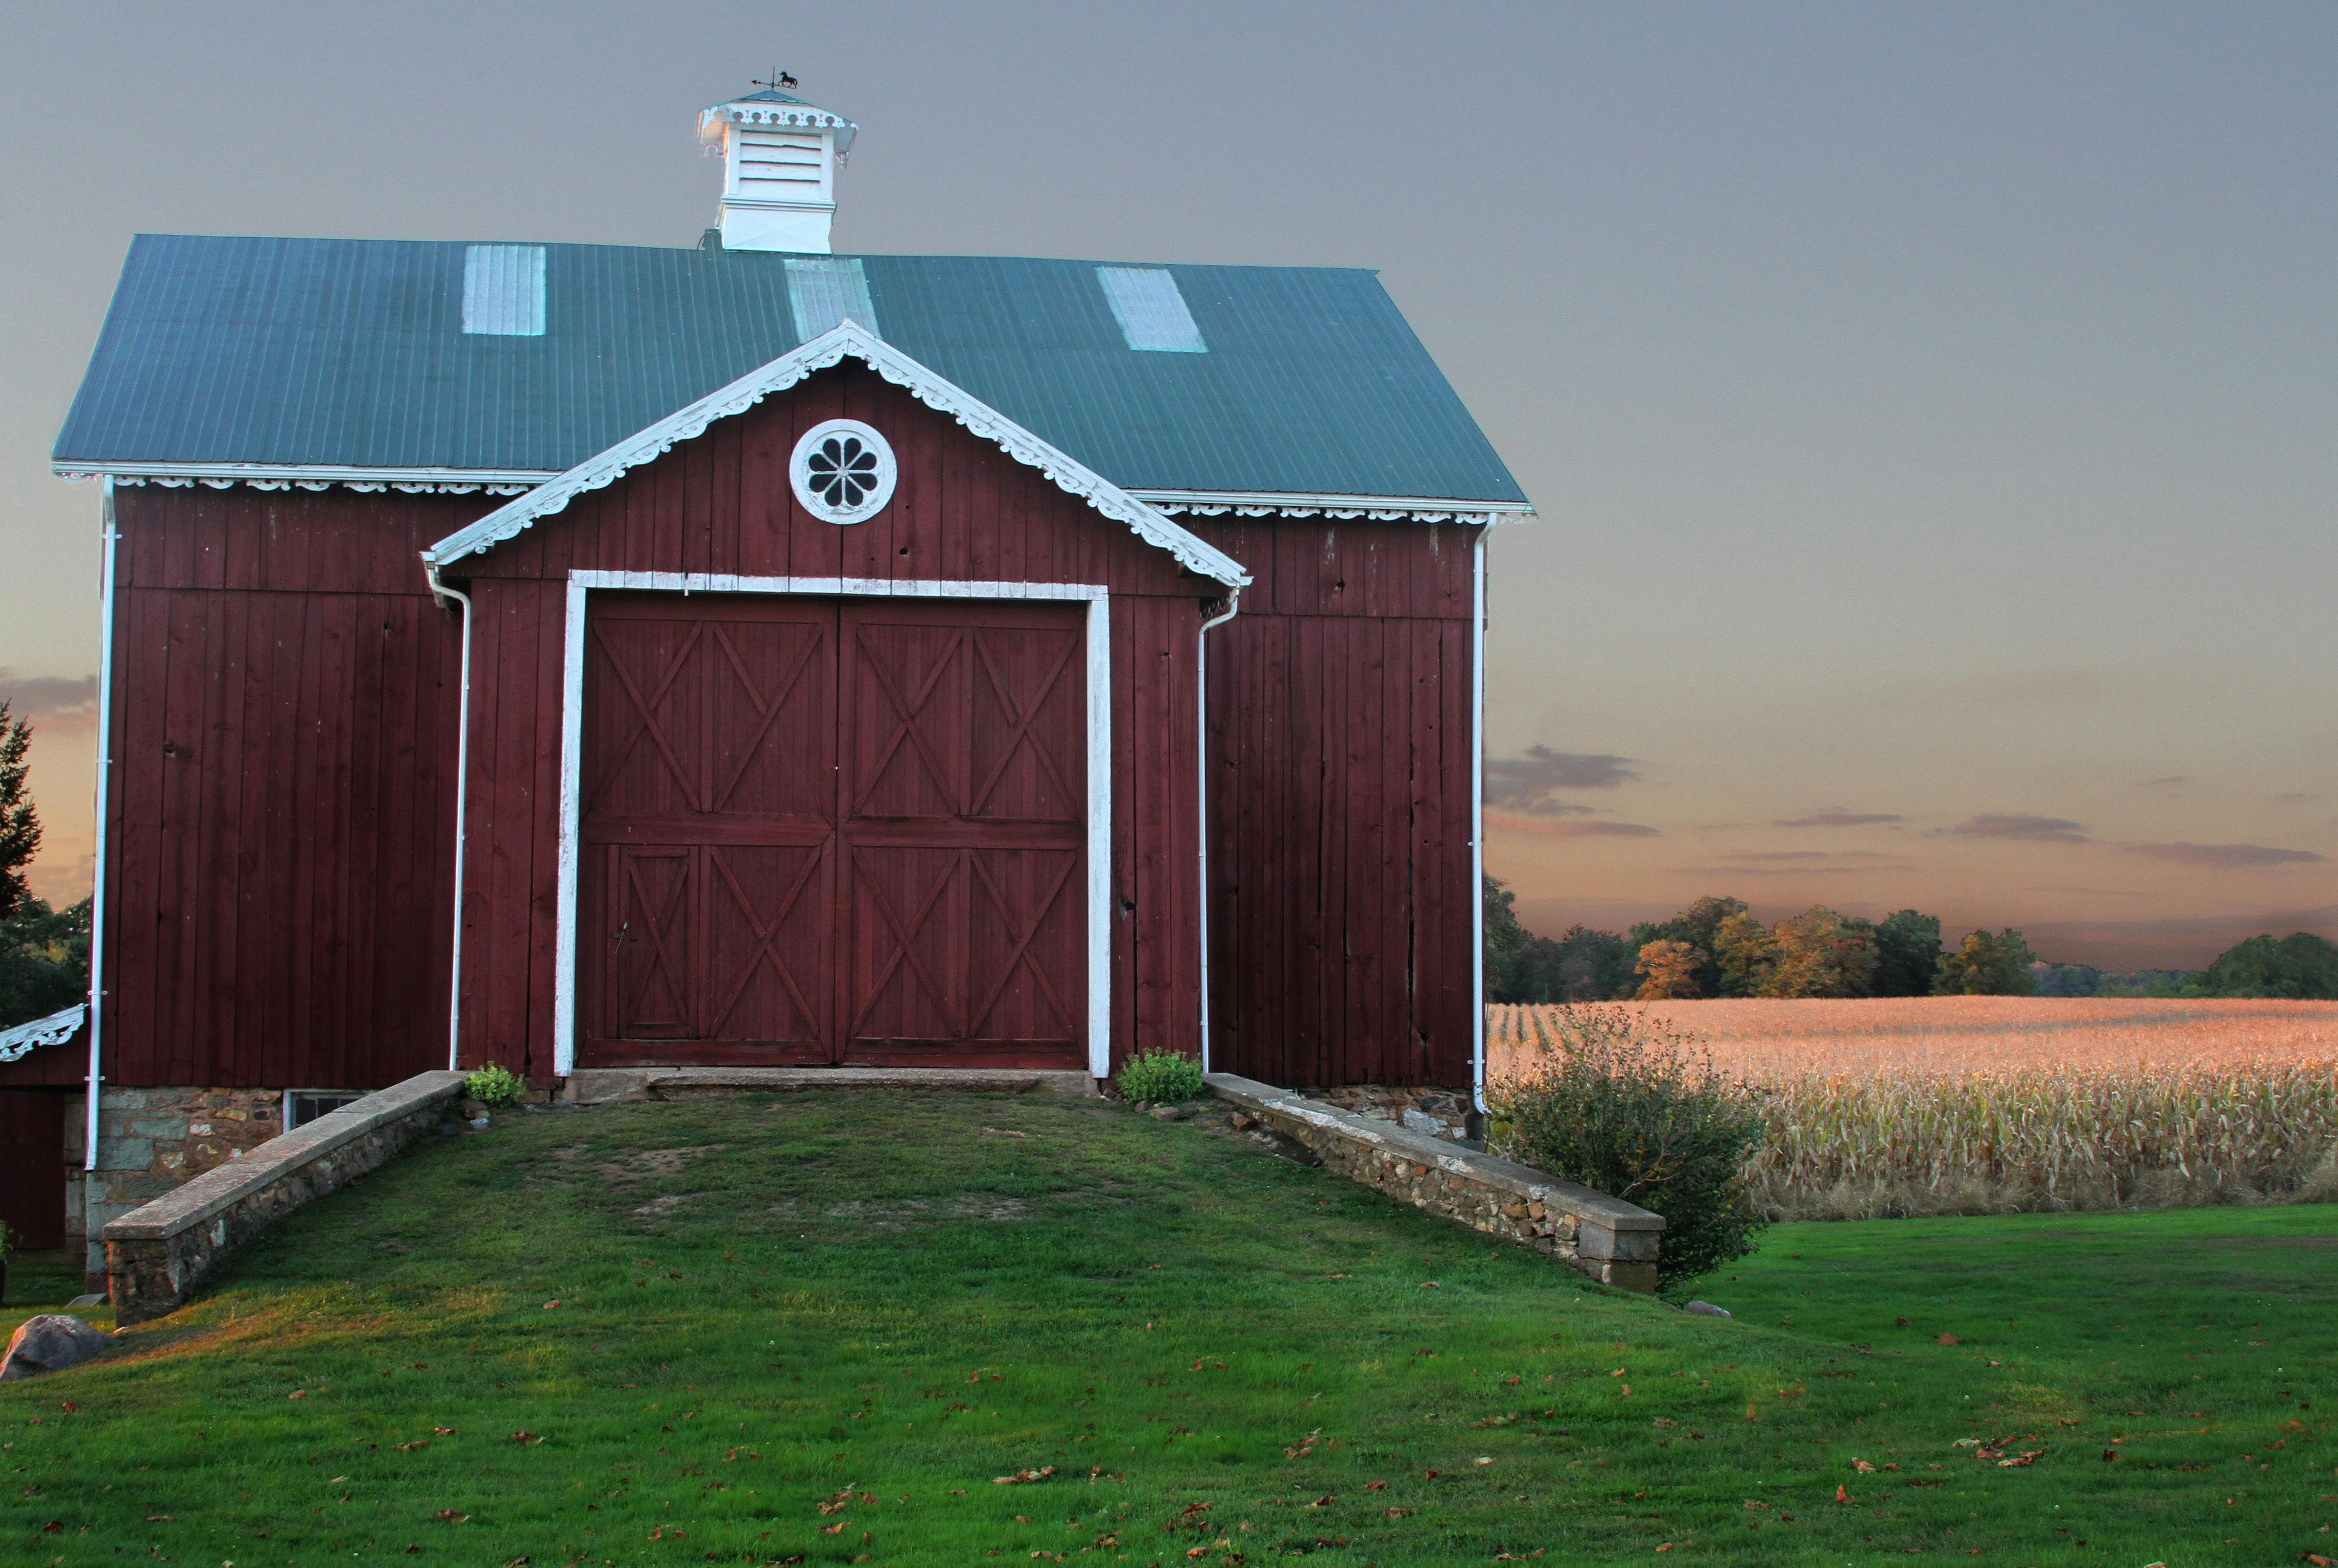 A dark red barn with closed doors | Source: Pexels